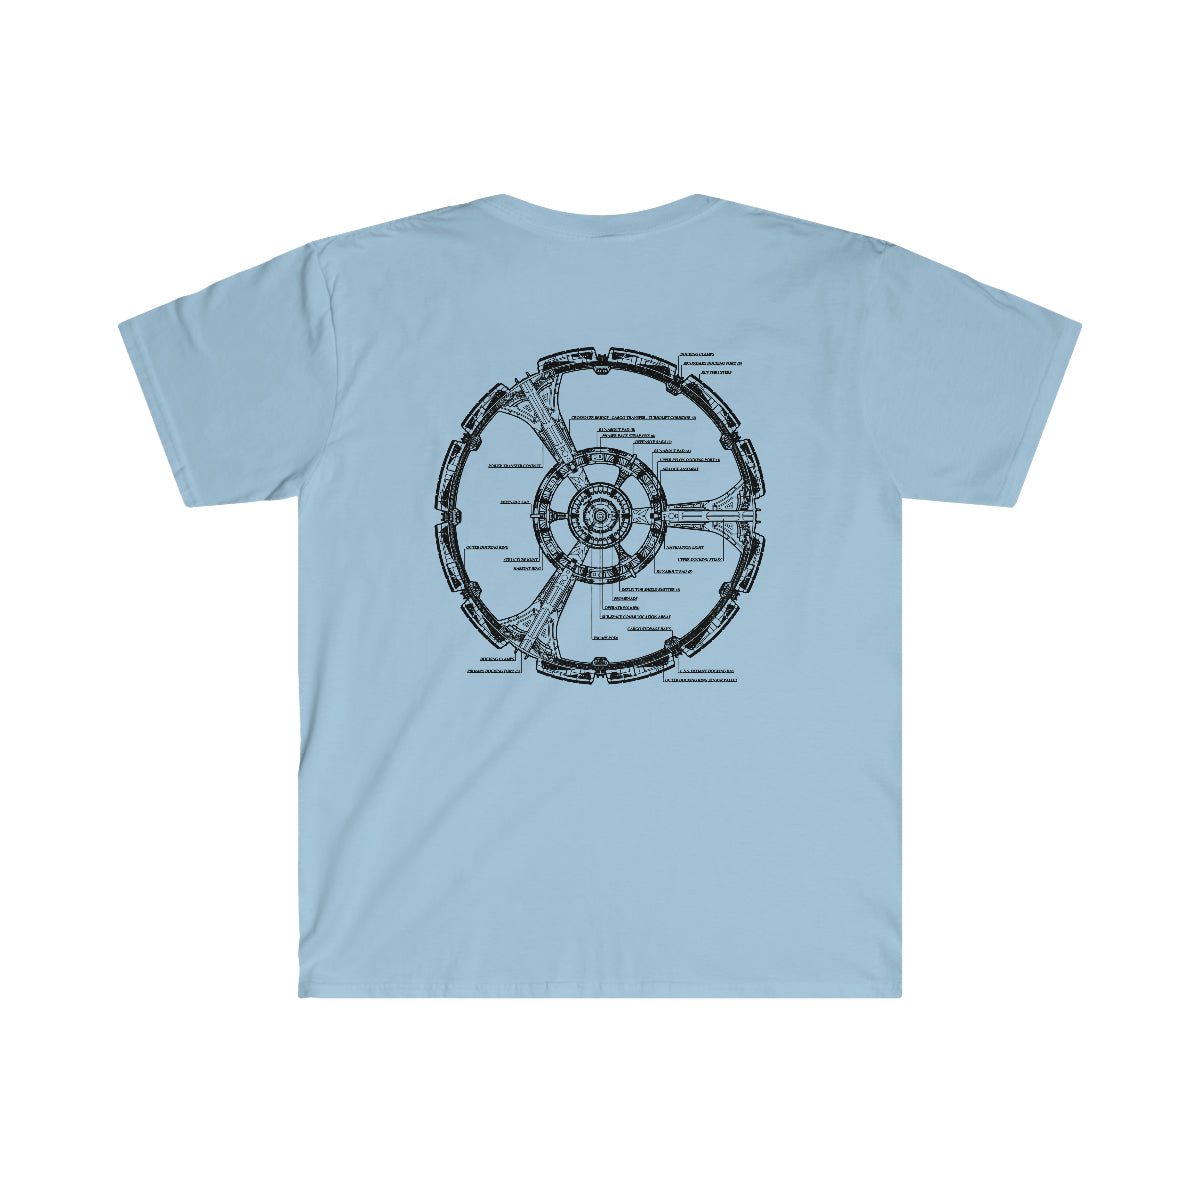 A Limited Edition Space Station T-Shirt with a graphic design of a wheel.